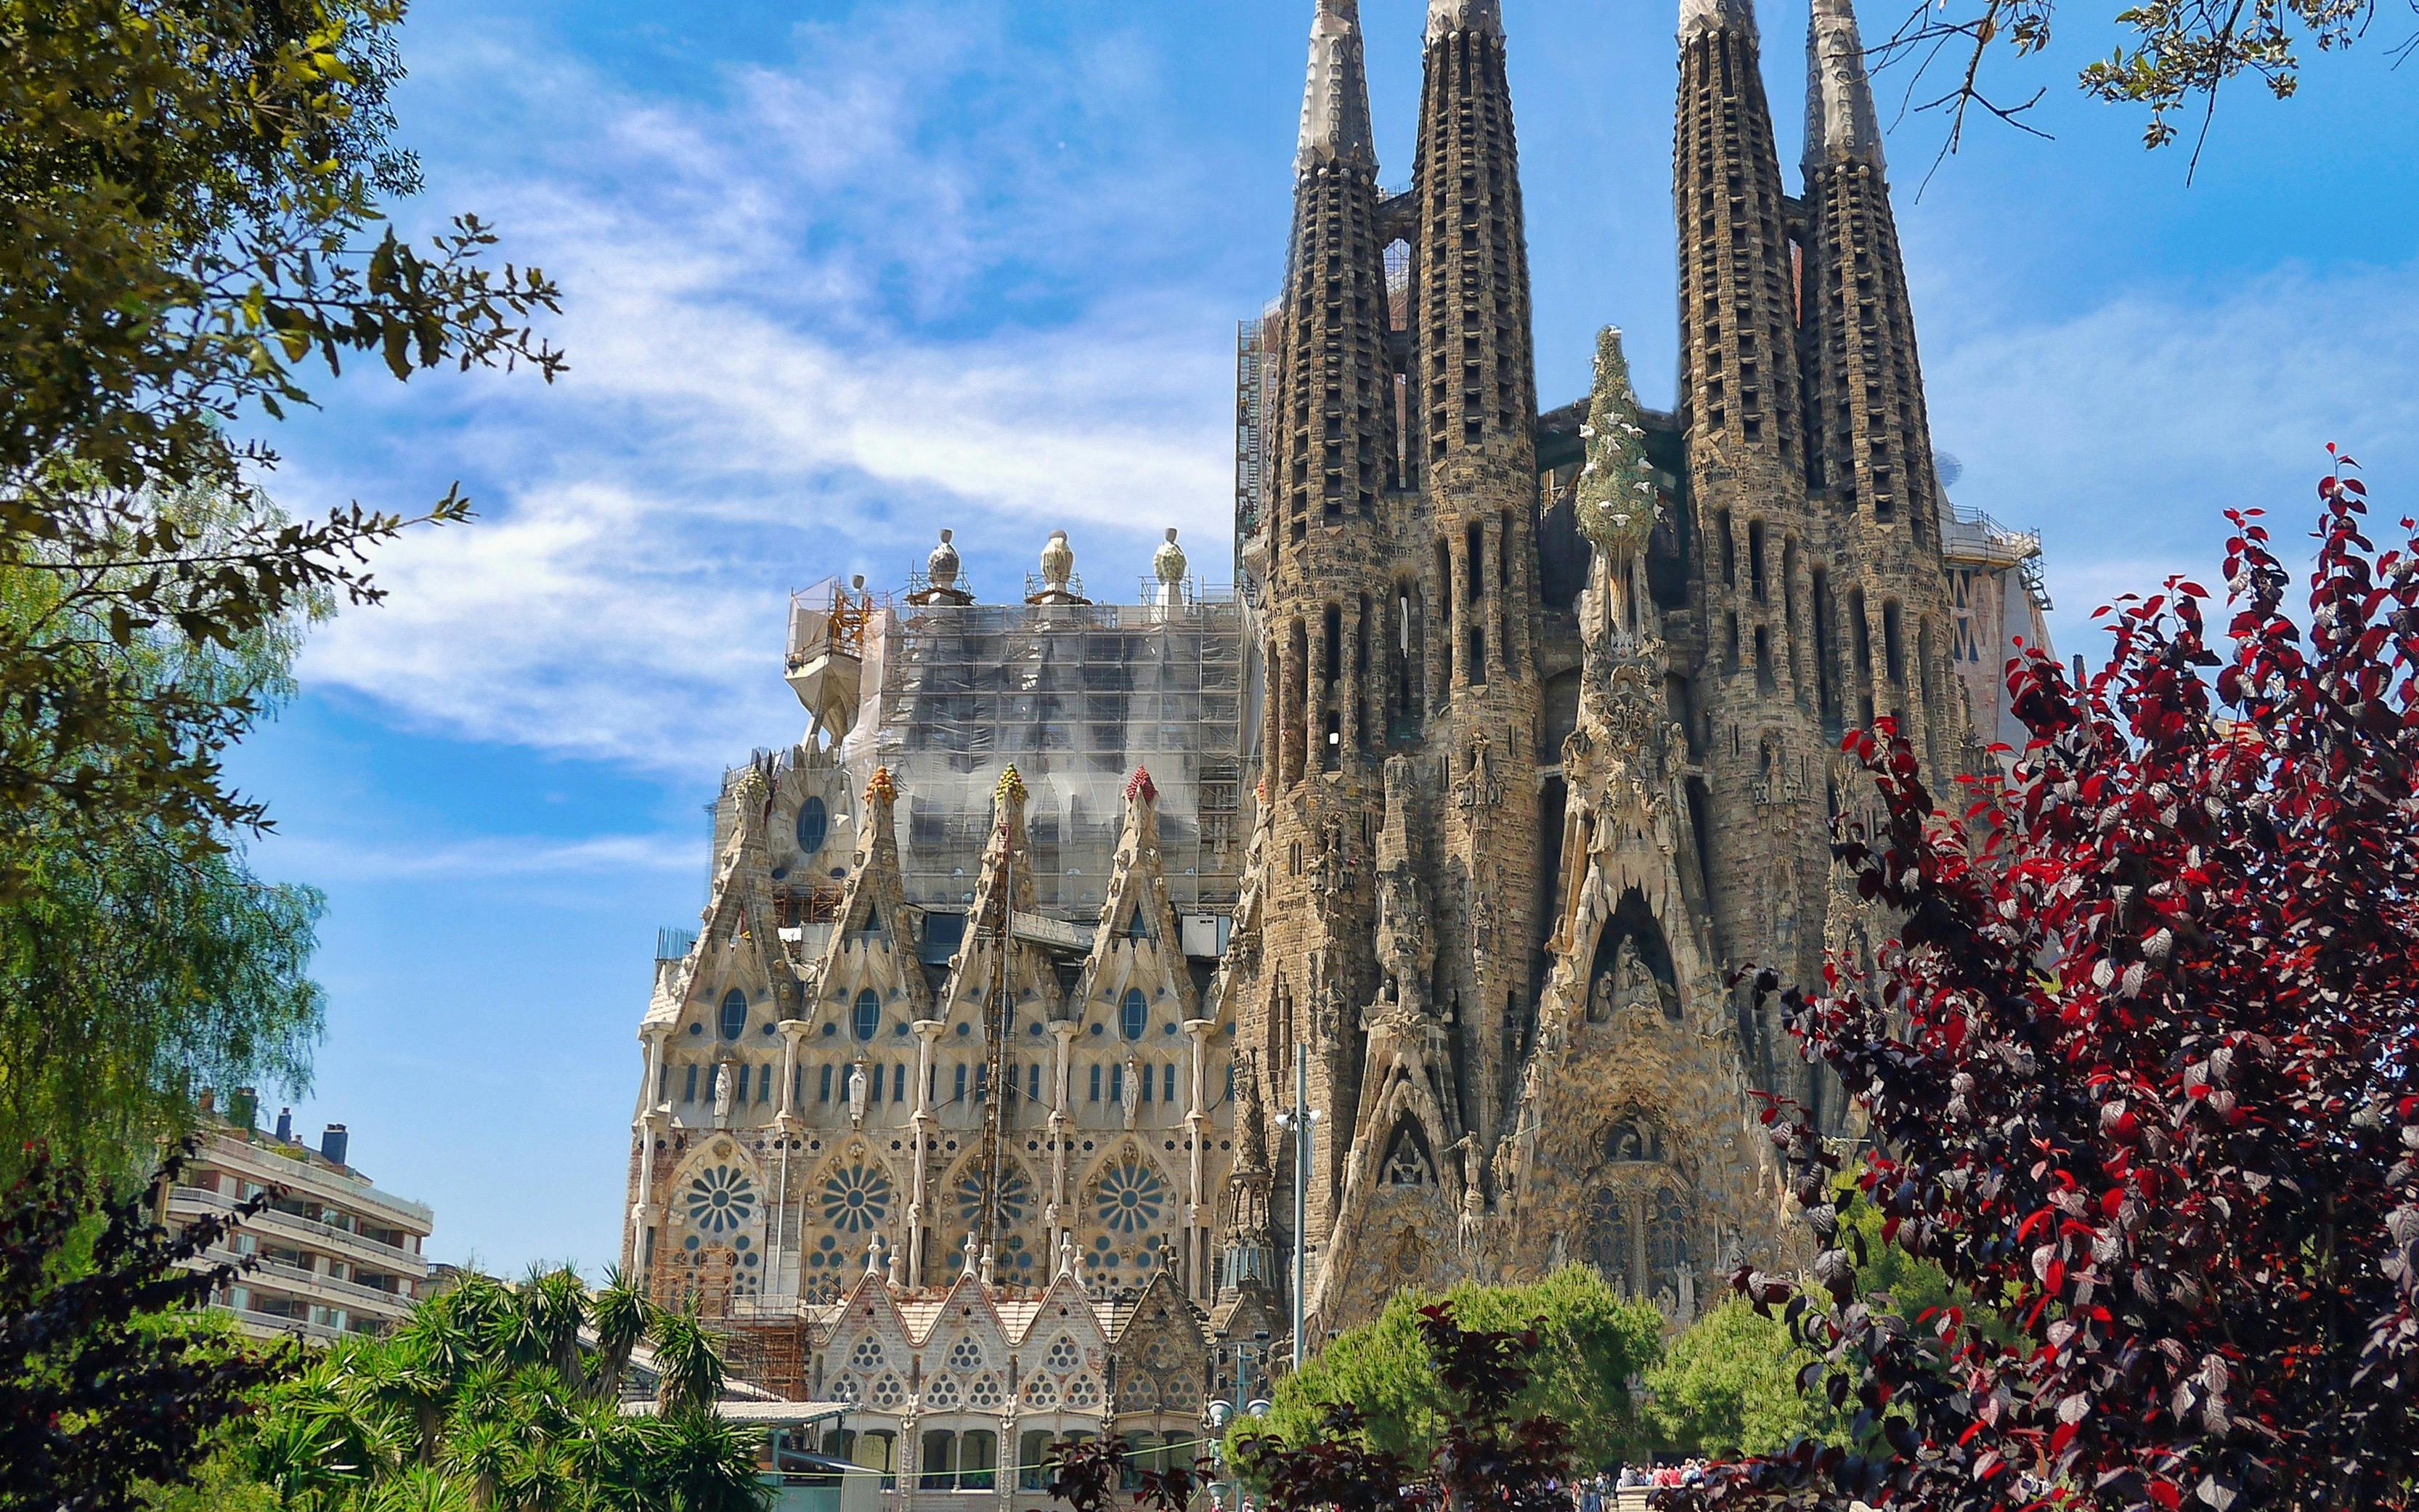 Injectie Nauwkeurig Leerling All Your Sagrada Familia Tickets & Tour Options (COVID-19 Update)